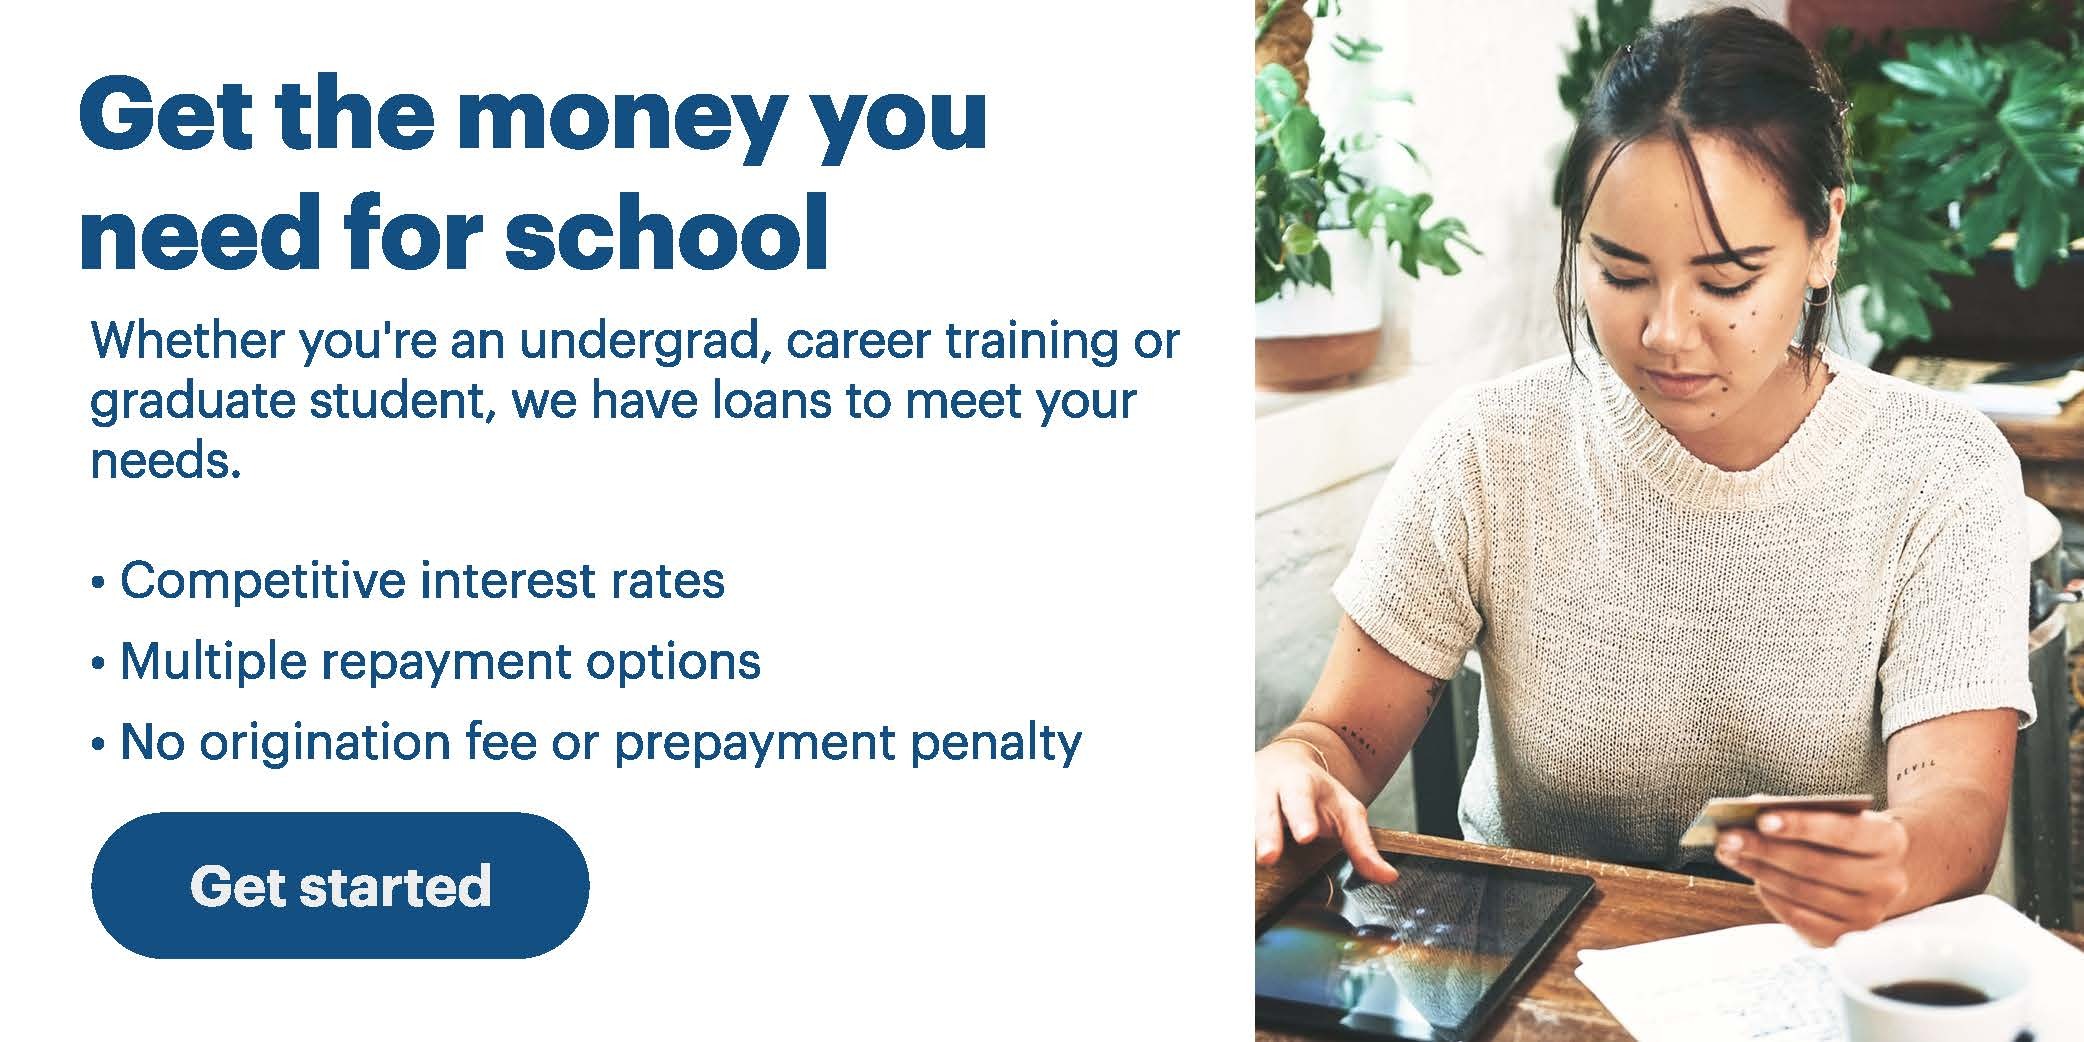 Golf Academy of America-Altamonte Springs Private Student Loans by SallieMae for Golf Academy of America-Altamonte Springs Students in Apopka, FL